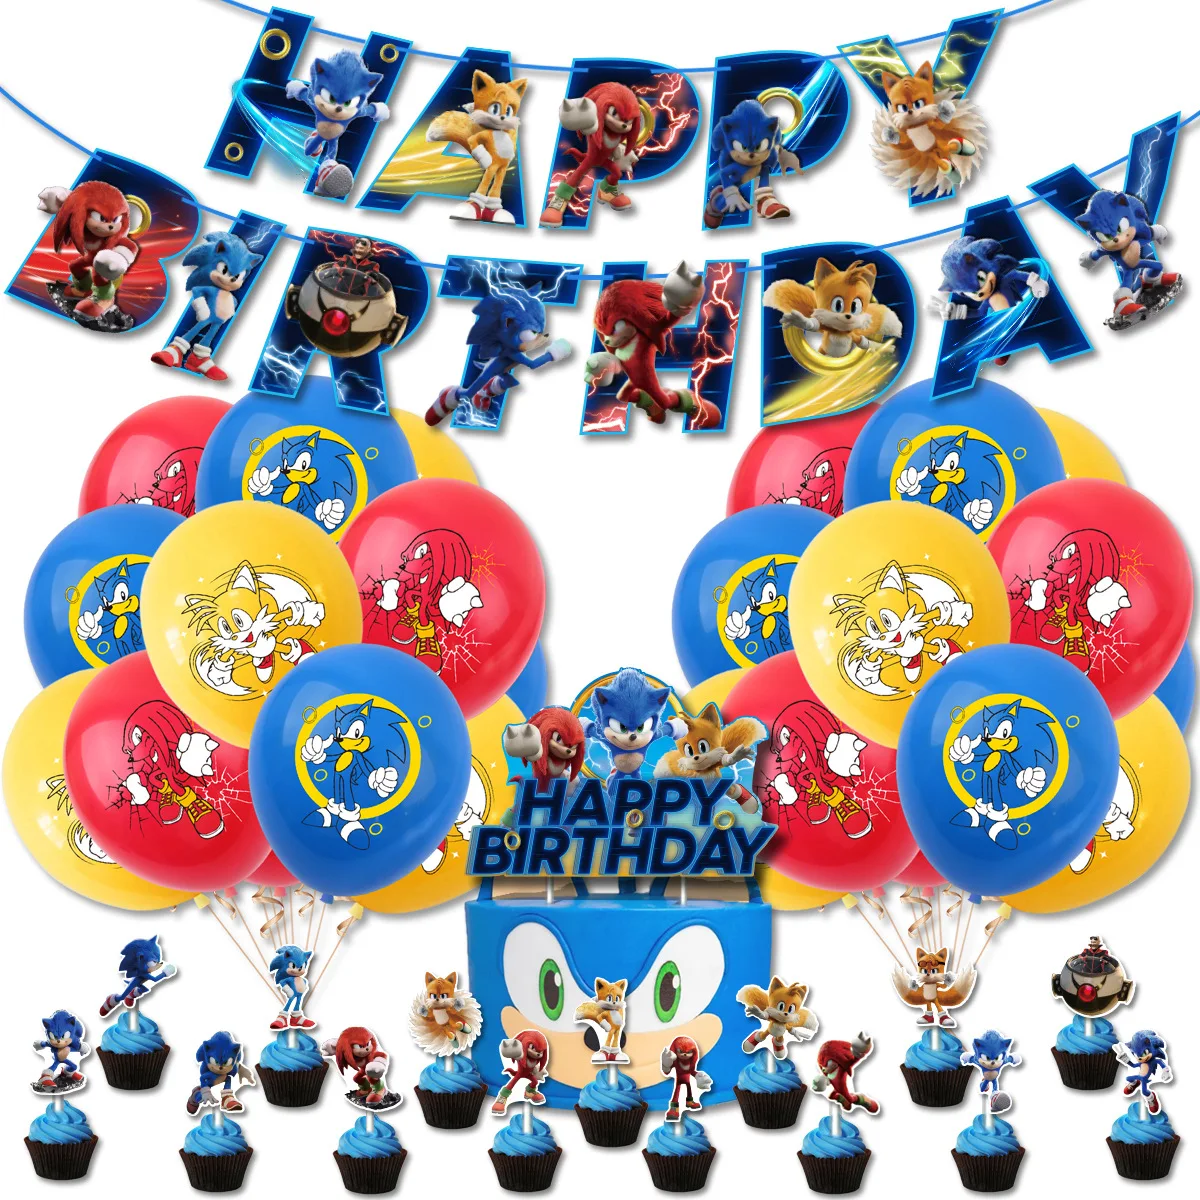 OPATER 6 Pcs Sonic The Hedgehog Balloons Birthday Party Supplies